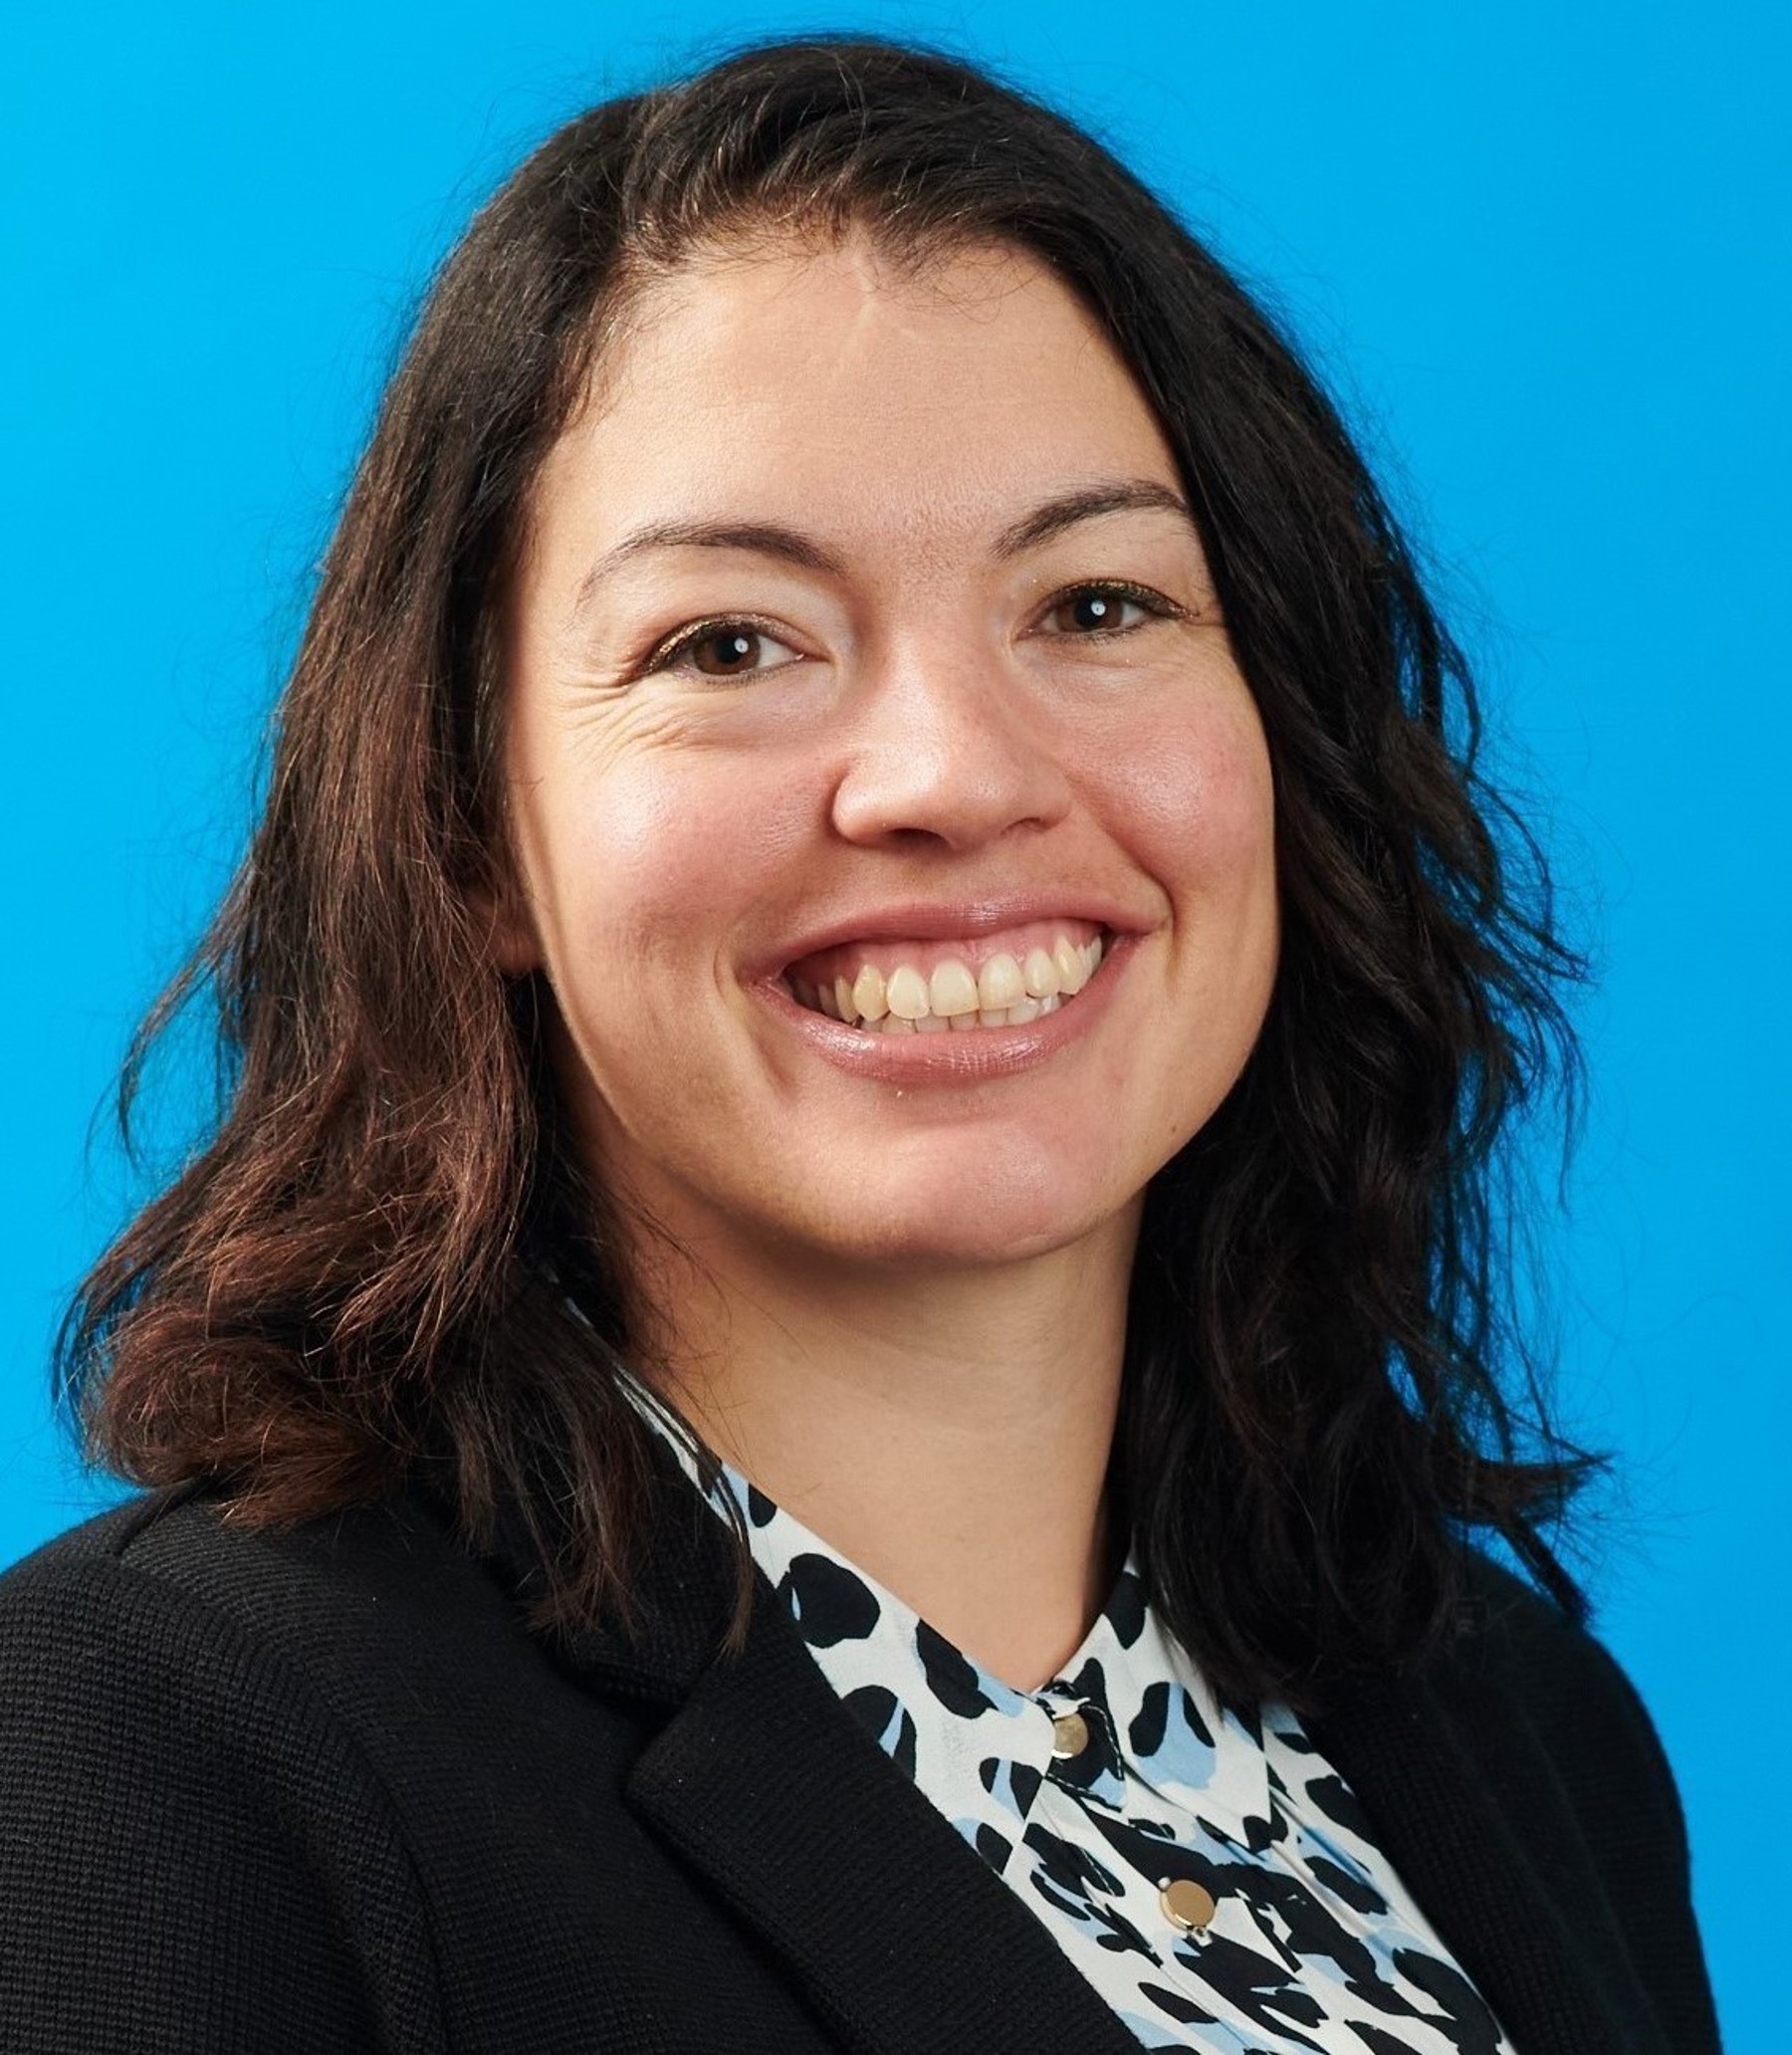 Headshot of Chloe Kembery smiling at the camera wearing a black, white and blue patterned shirt and black blazer